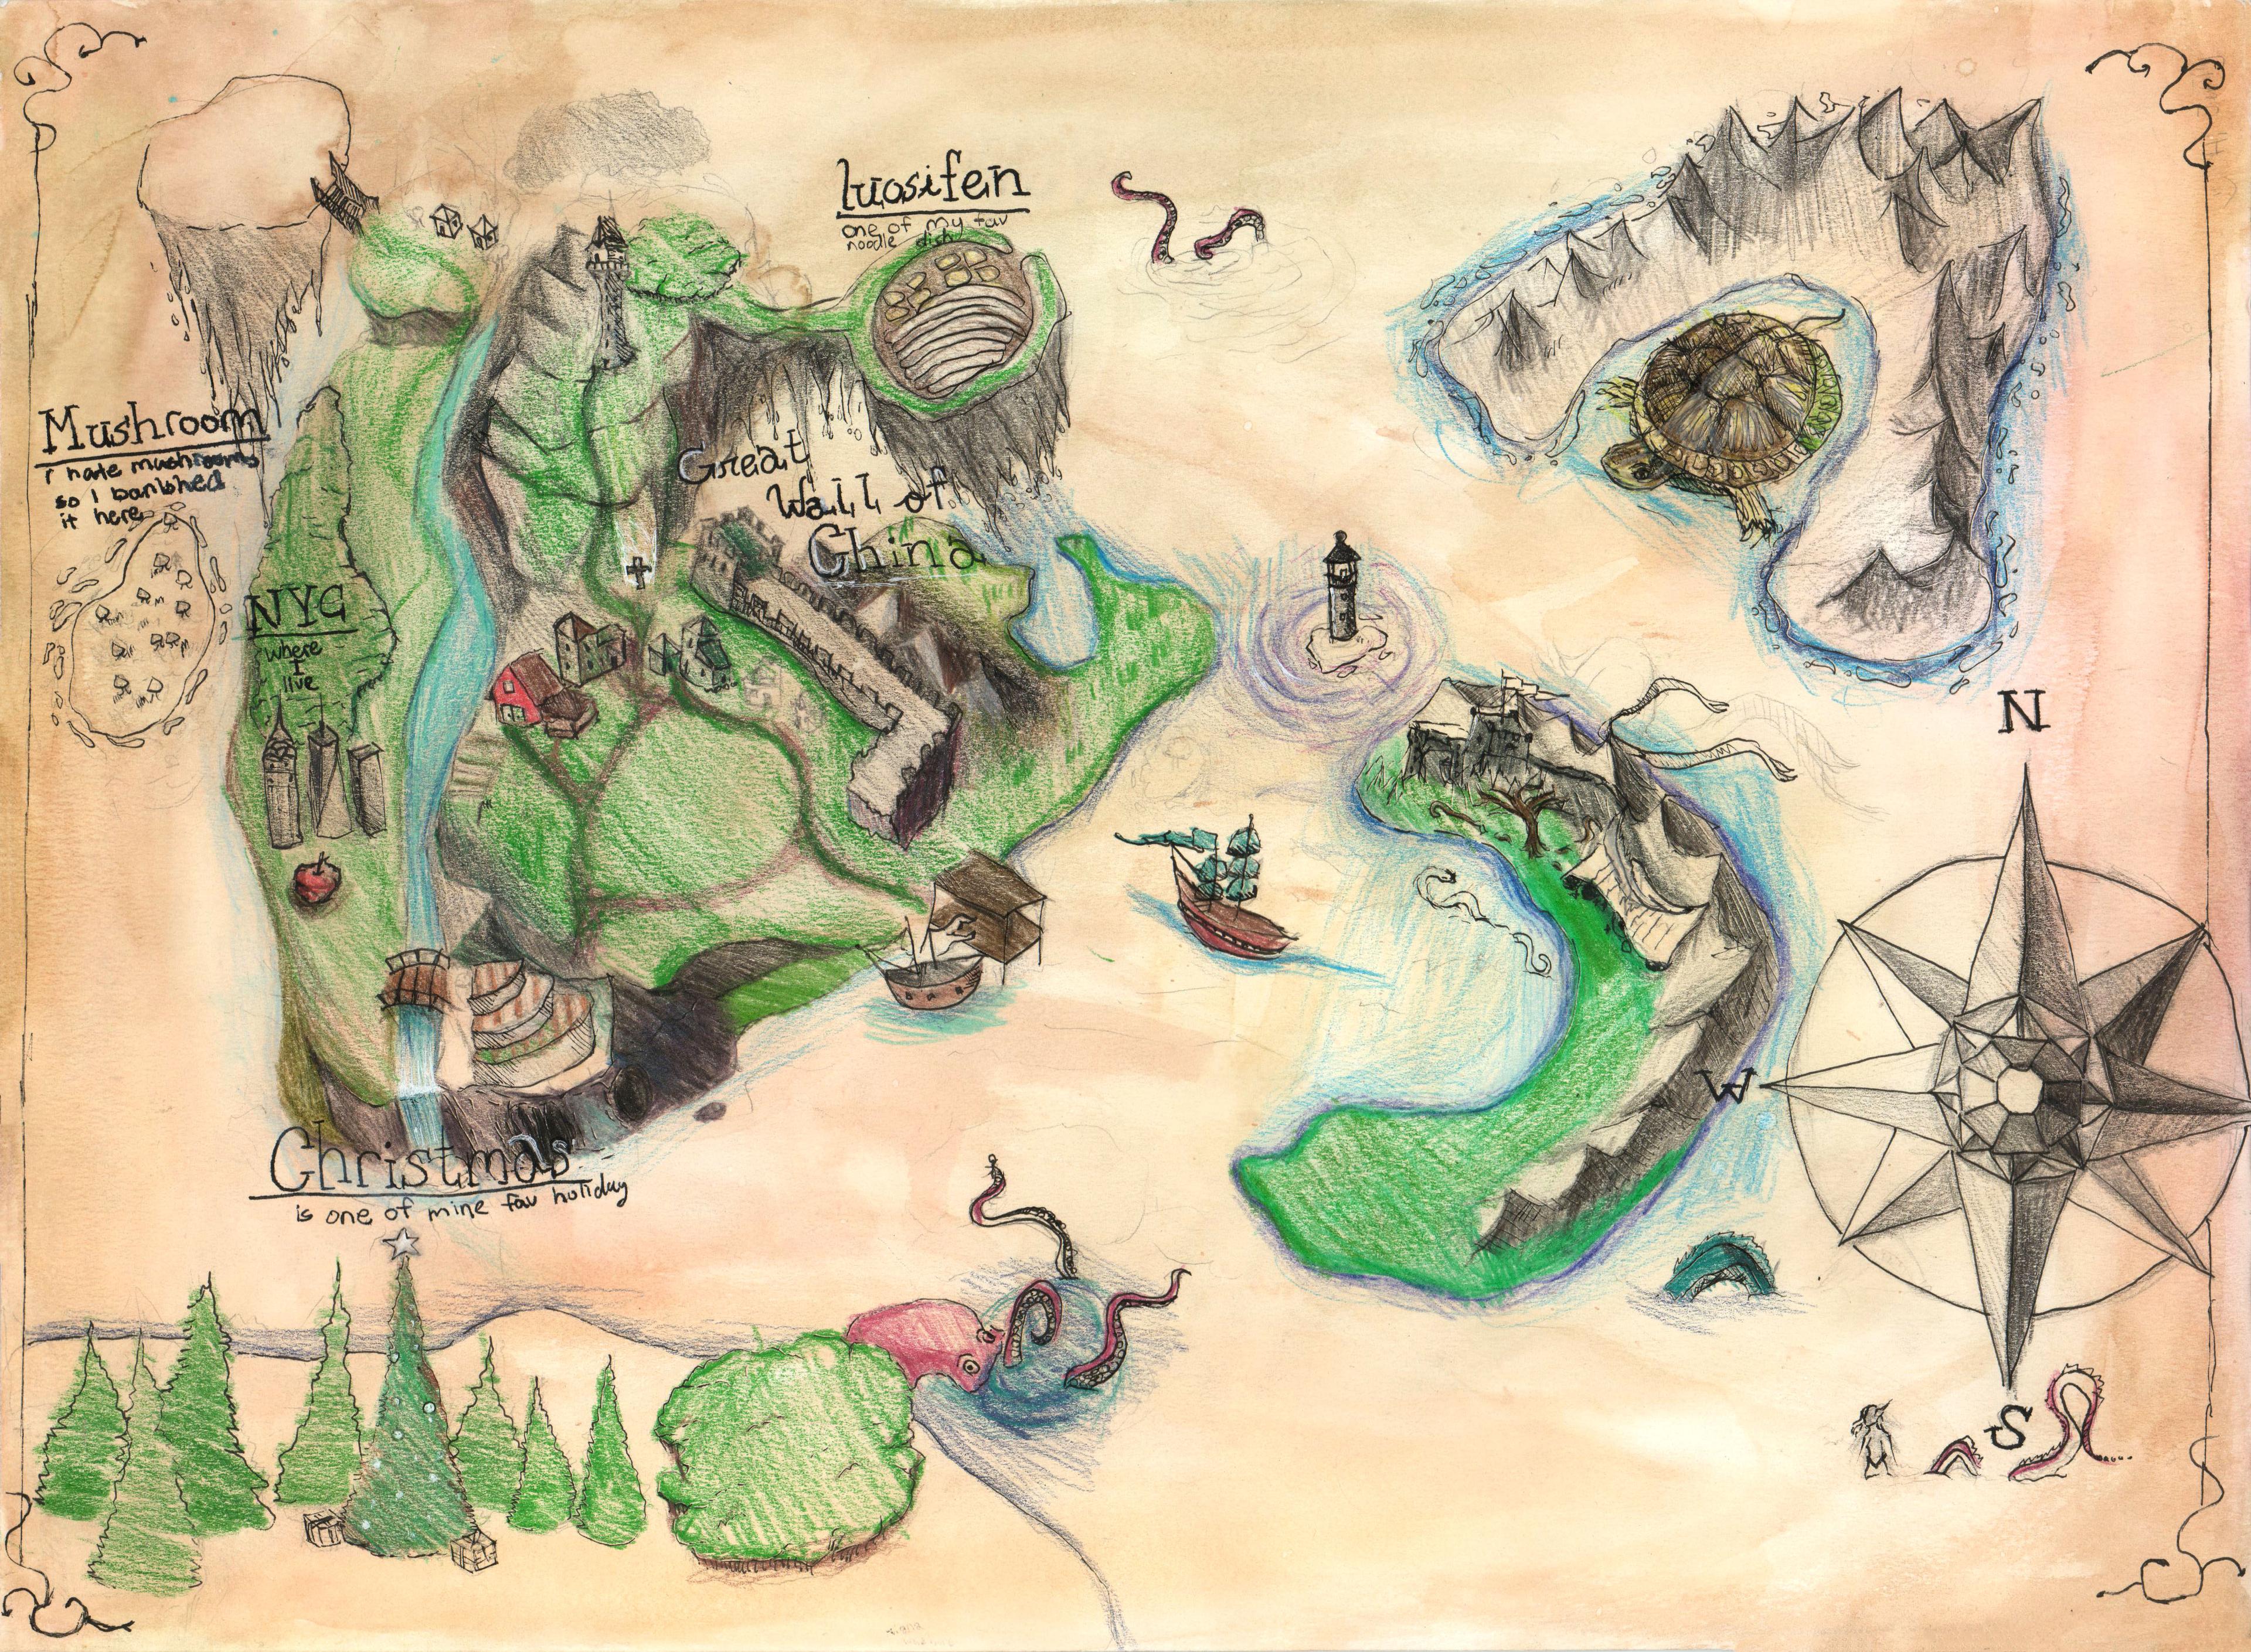 Drawing of an overhead map made with watercolor, colored pencil, and pen. The map shows a large green wedge-shaped island to the left, a small green island to the right shaped like a backwards letter C, and a small gray mountainous island to the top right that has a large bay in the middle with a giant turtle floating in the water. A small lighthouse on a tiny island sits directly between the large and small green islands. A small island, where mushrooms have been banished, is to the left of the large green island. Black text captions appear over landmarks on the large green island, such as NYC, Luosifen, and the Great Wall of China. Emerging at the bottom left corner of the map is a horizontal island with green pine trees labeled Christmas. A giant red octopus emerges from the water above the Christmas island to the right. A stylized nautical navigation compass is drawn near the bottom right edge of the map. A sea monster swims directly beneath the compass. A clipper ship sails from the small green island to a dock on the large green island.